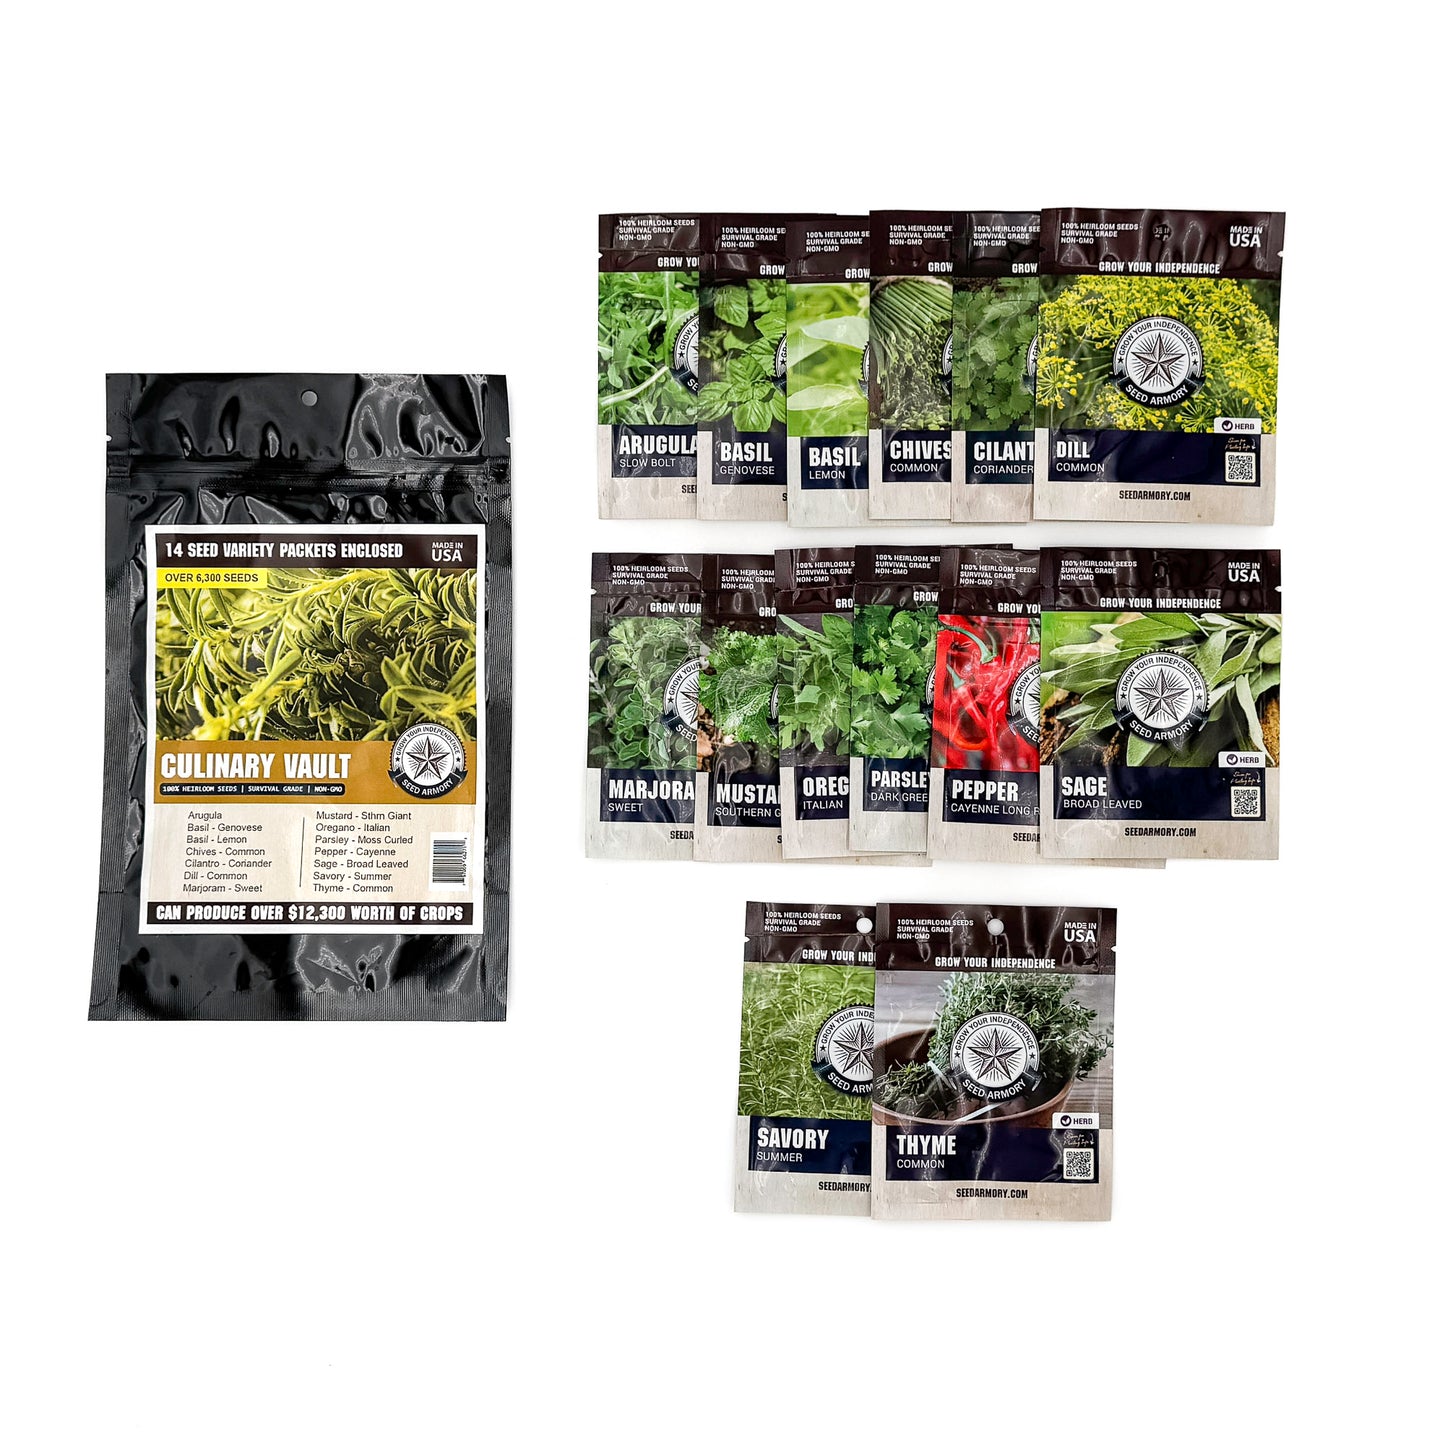 Ready-to-plant seed packets from the Survival Seed Vault Super Kit